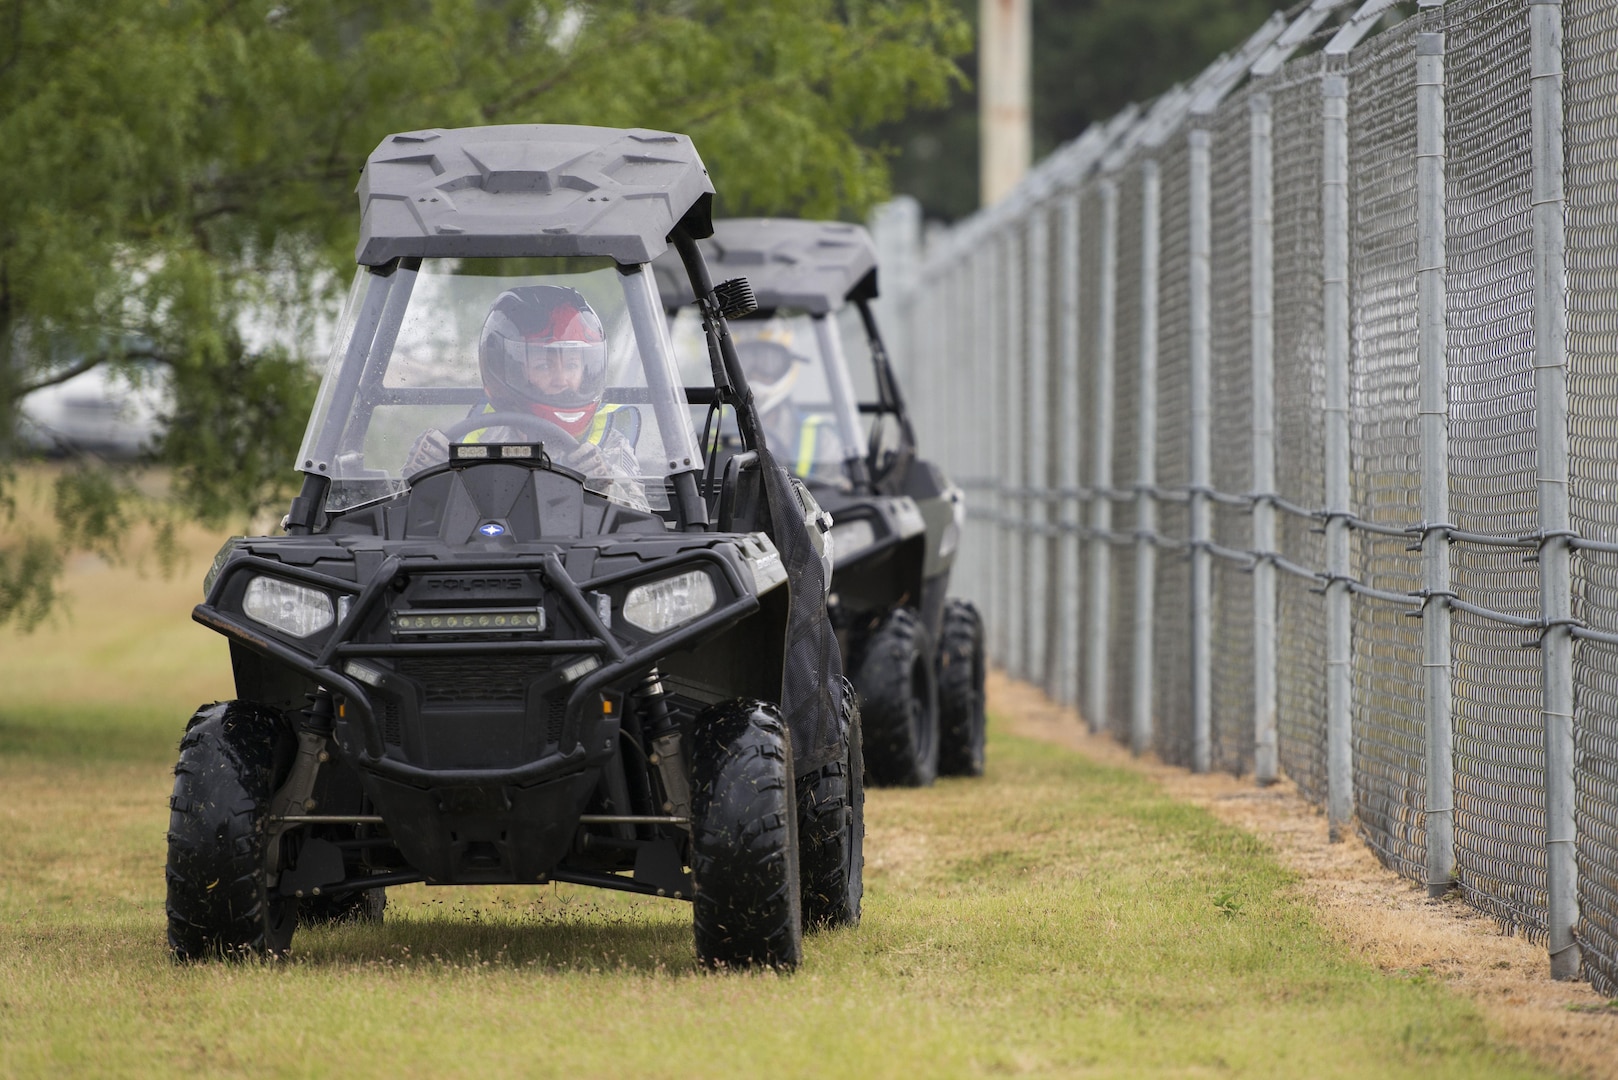 Technical Sgt. Michelle Aberle, 802nd Security Forces Squadron installation security, and Technical Sgt. Paul Turner, 802nd Security Forces Squadron installation security, drive along the base fence line during a security check May 9, 2017, at Joint Base San Antonio-Lackland, Texas.  Aberle and Turner provide force protection for base personnel, equipment and facilities from threats to include intrusion by unauthorized people. 